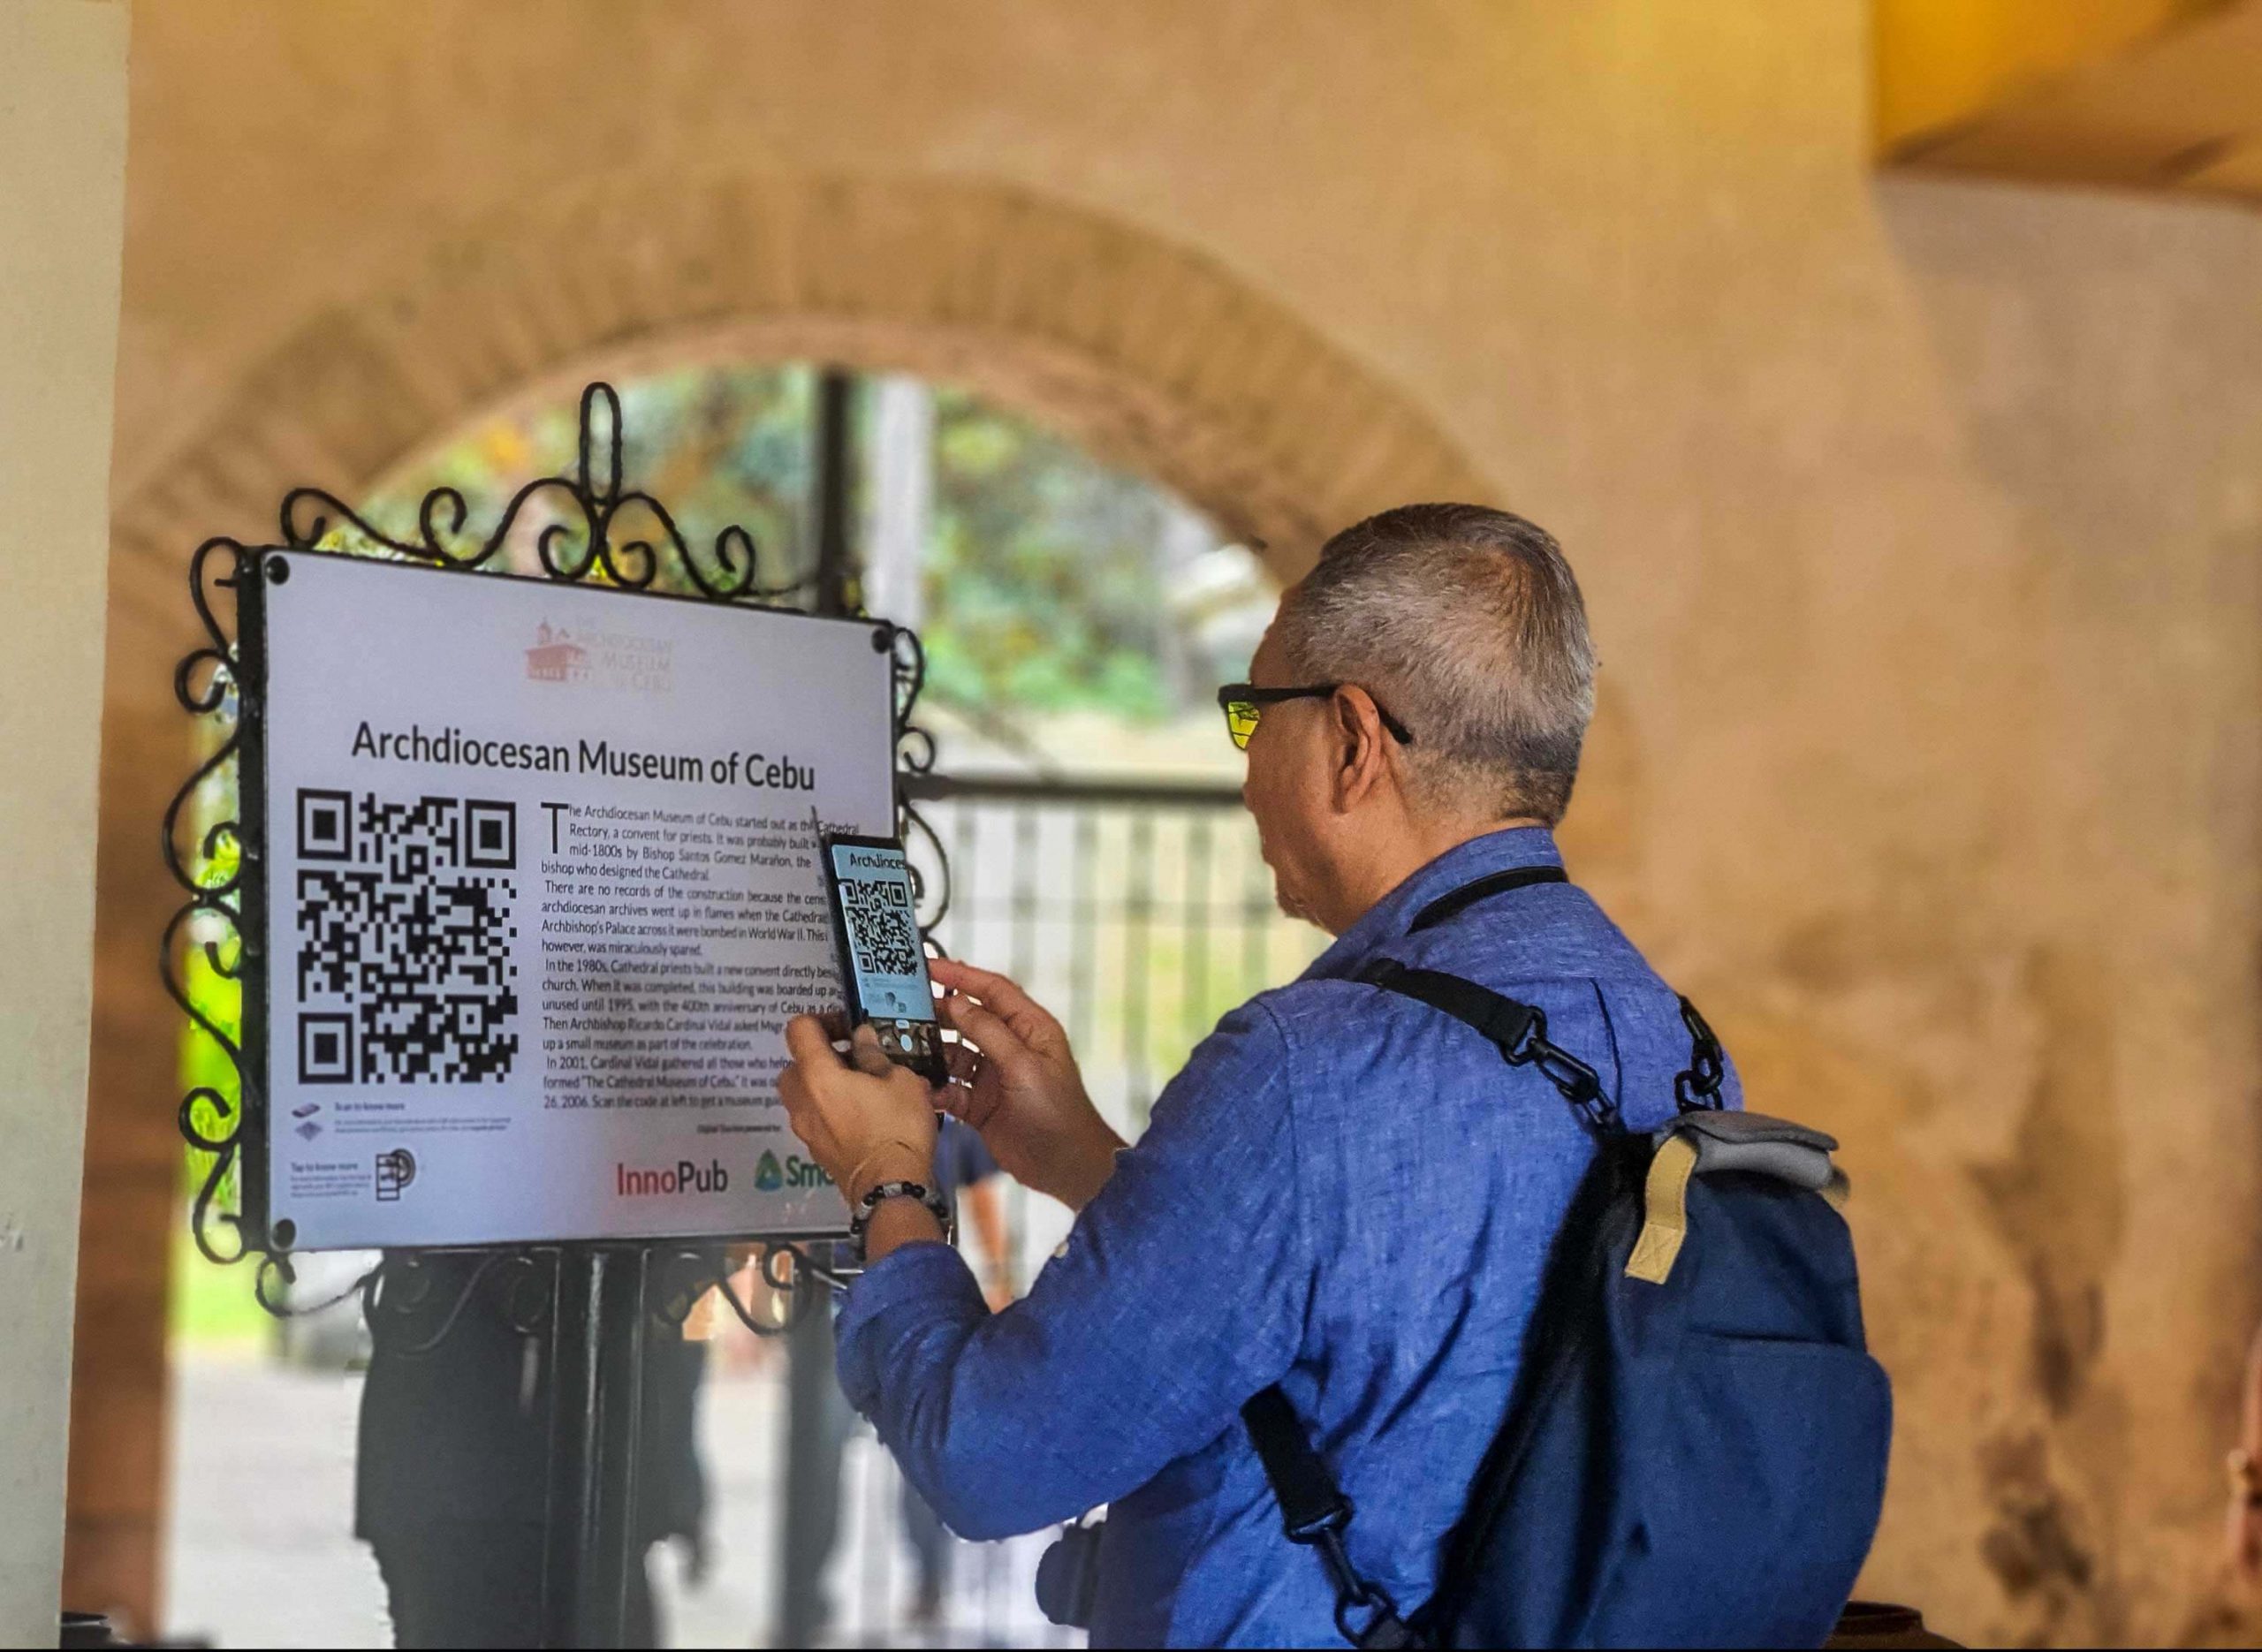 SCAN TO KNOW MORE. PLDT-Smart Public Affairs Group Head Ramon Isberto scans a QR code marker using his smartphone during the Smart’s Digital Tourism Heritage Walk, held recently in downtown Cebu City.